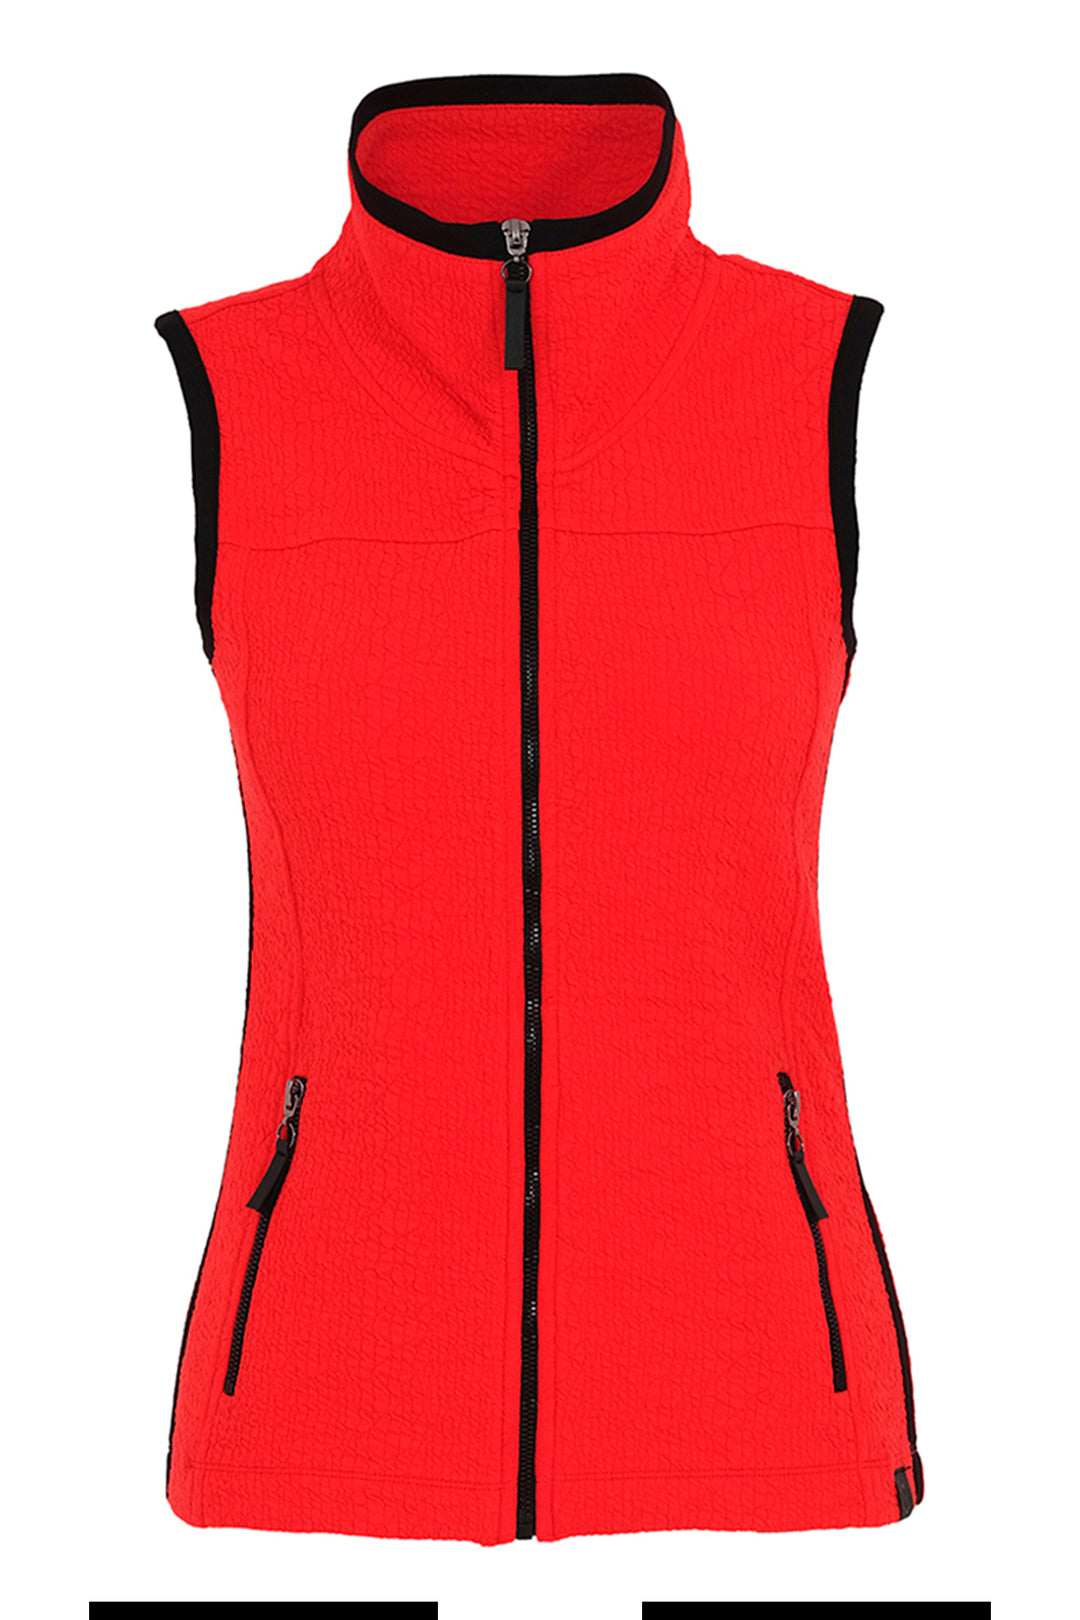 With a bright vibrant red colour and funnel neck design, this stylish piece is finished off with side zip pockets and a longer hemline.